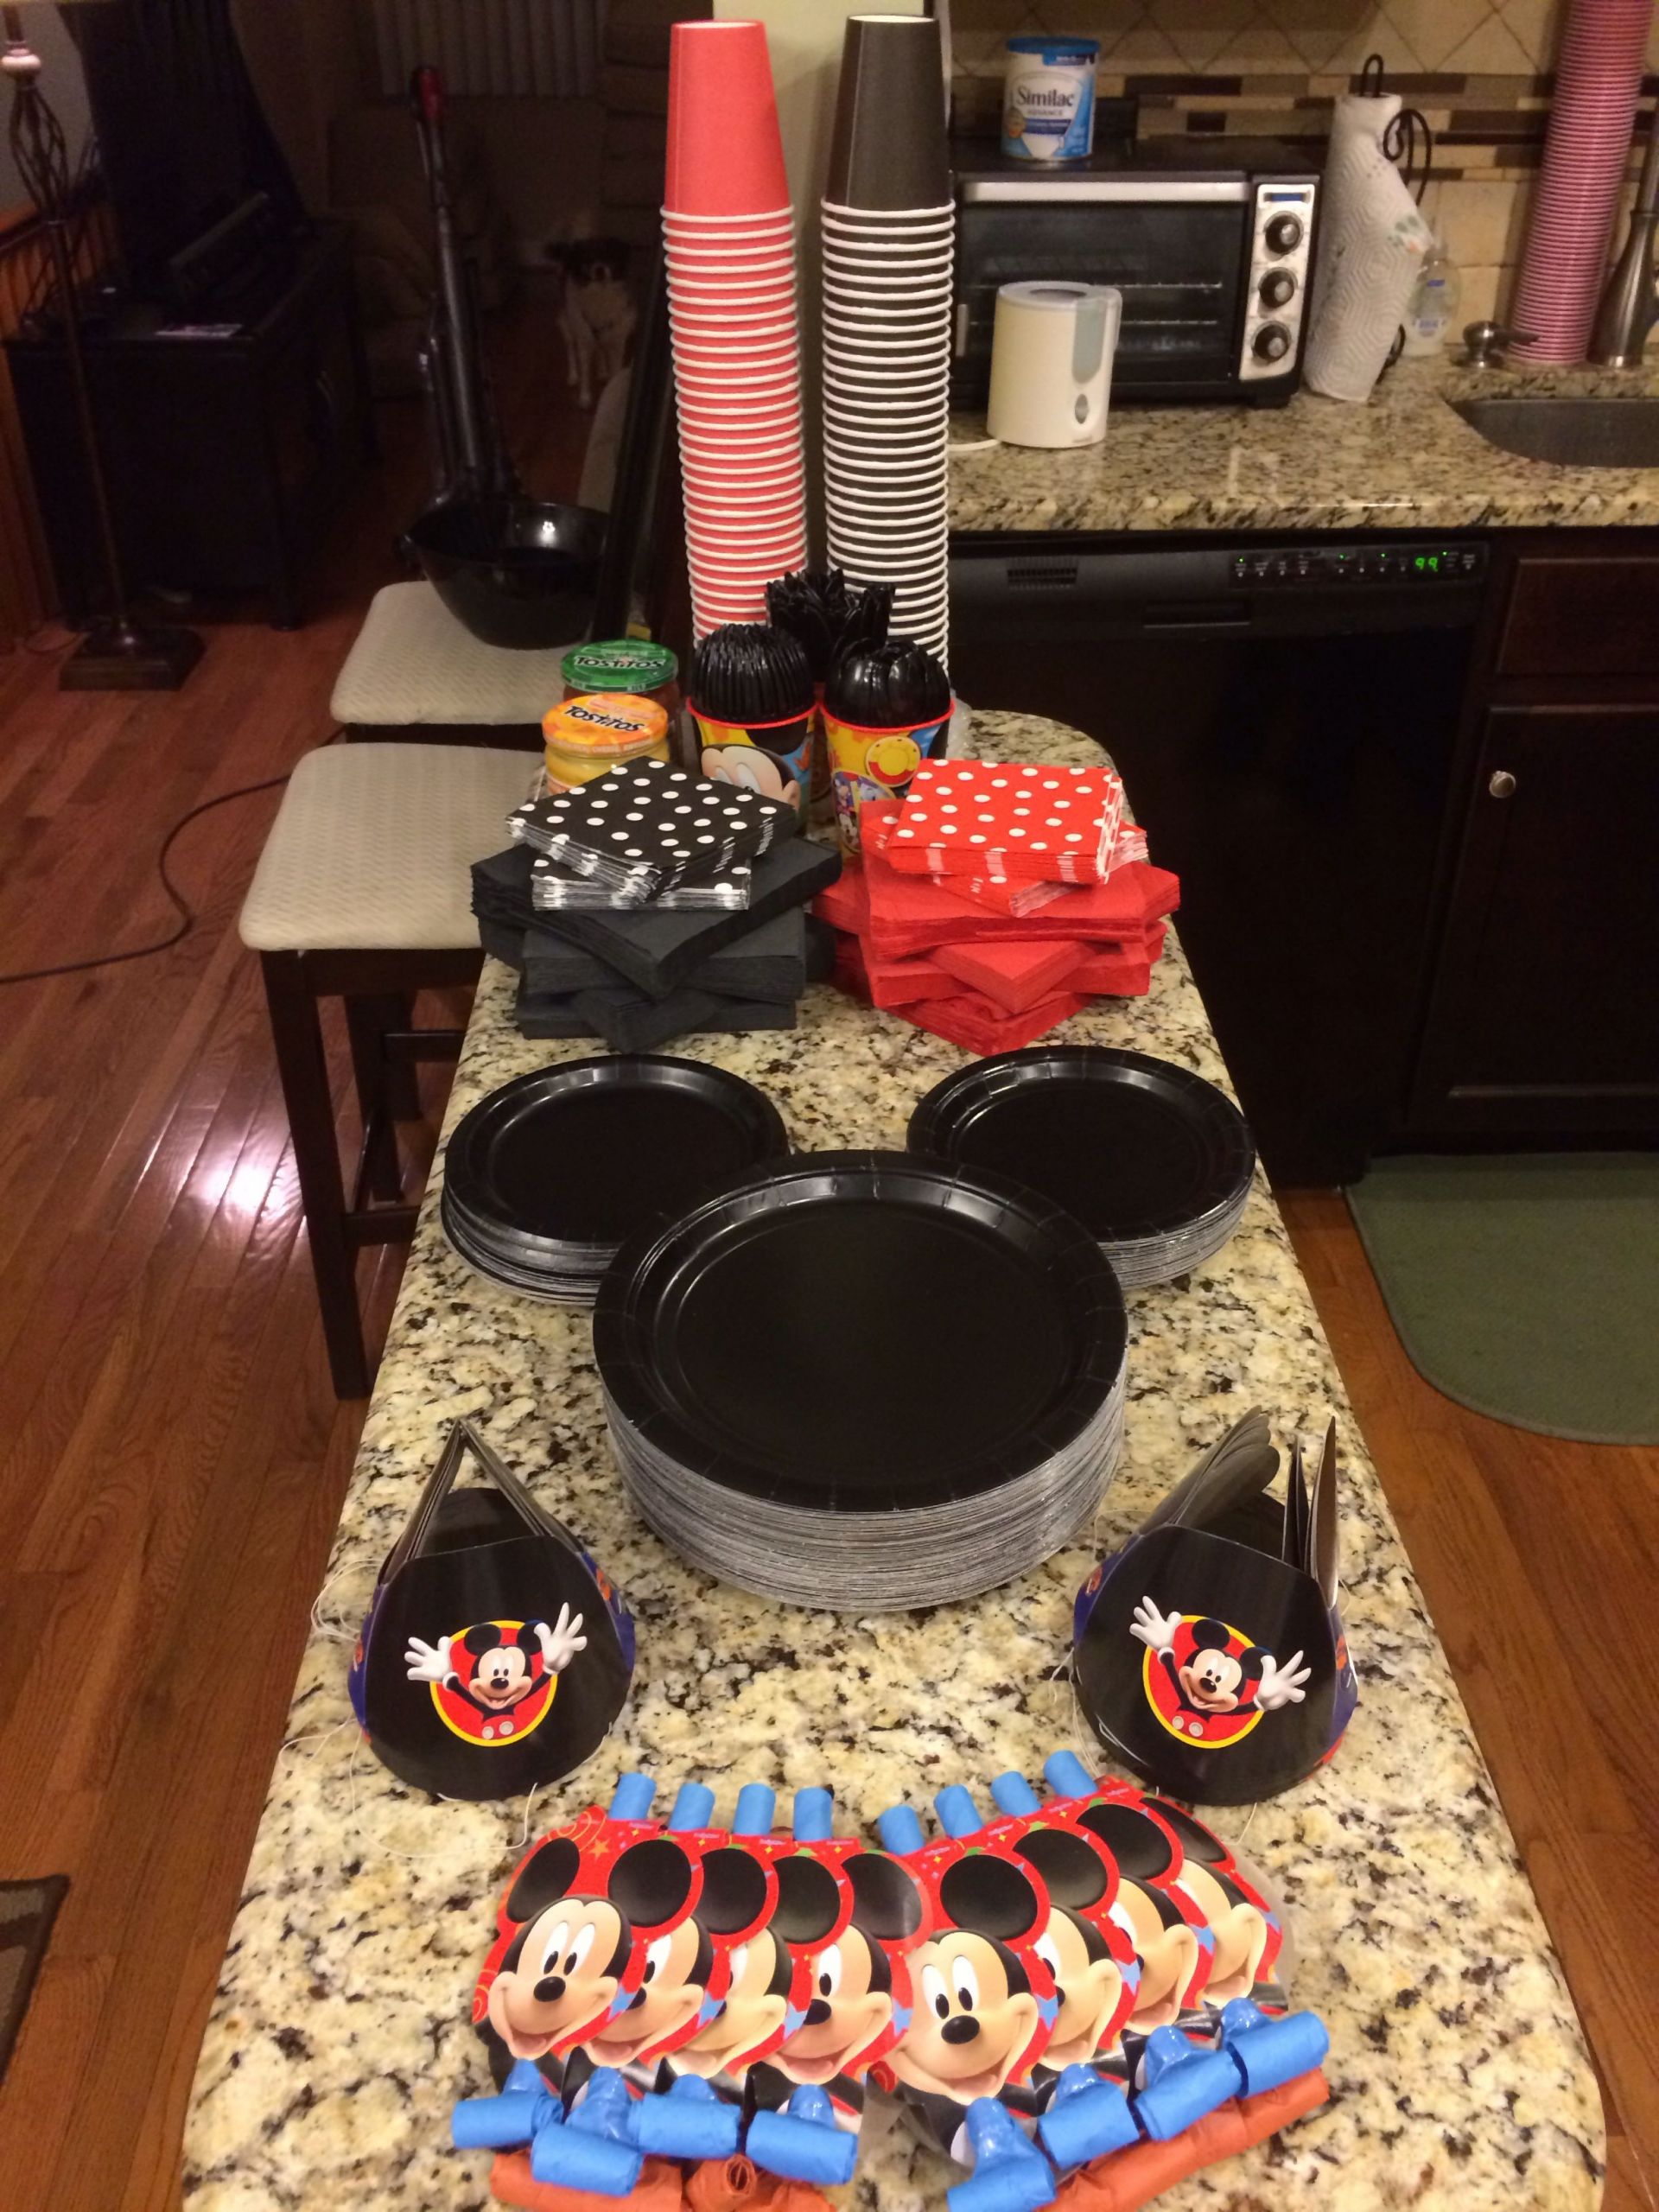 Mickey Mouse Birthday Party Decorations
 Easy diy decorations to make your Mickey Mouse birthday